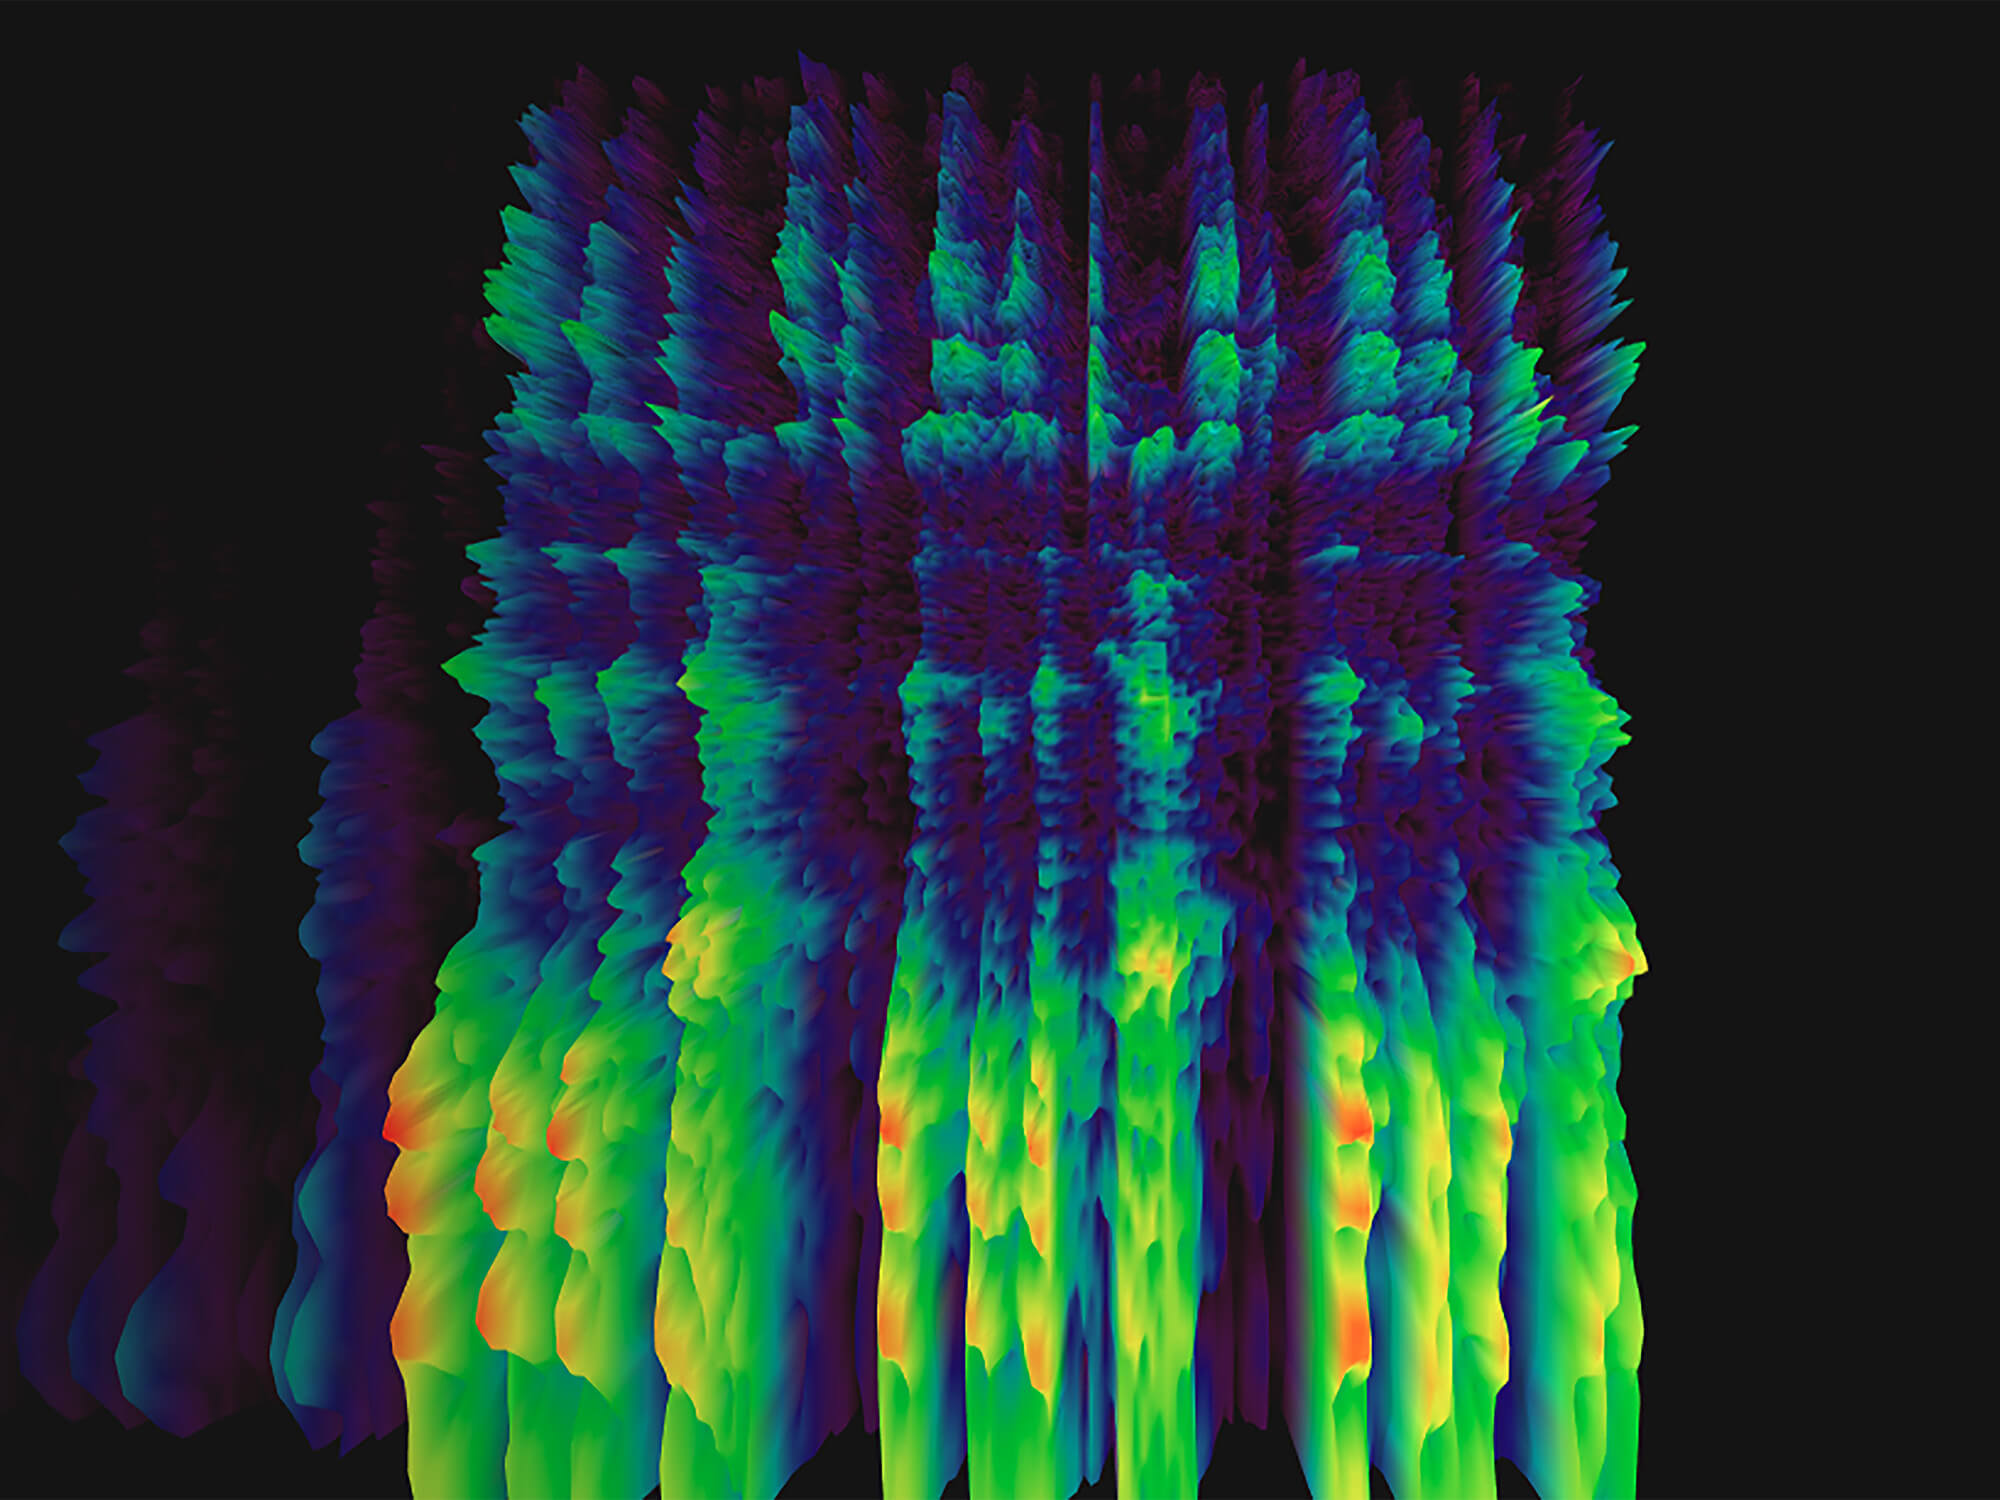 Example of a spectrogram